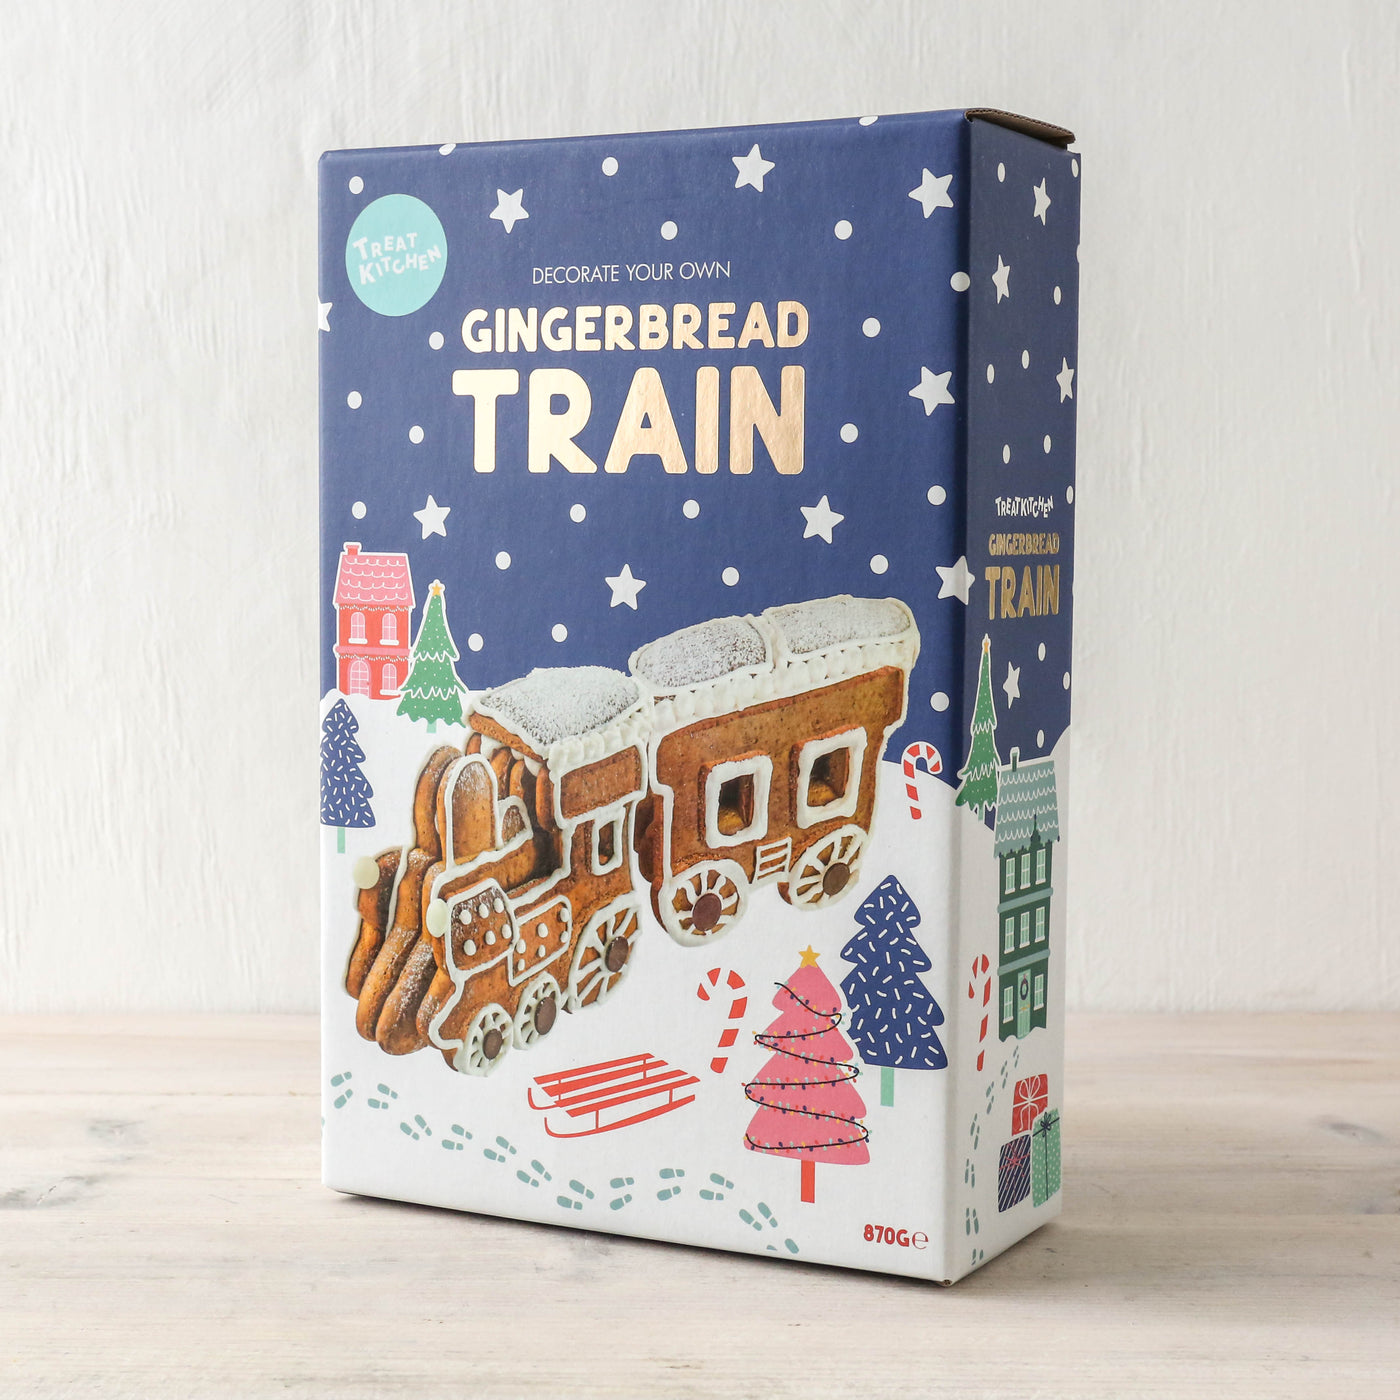 Decorate Your Own Gingerbread Train Kit